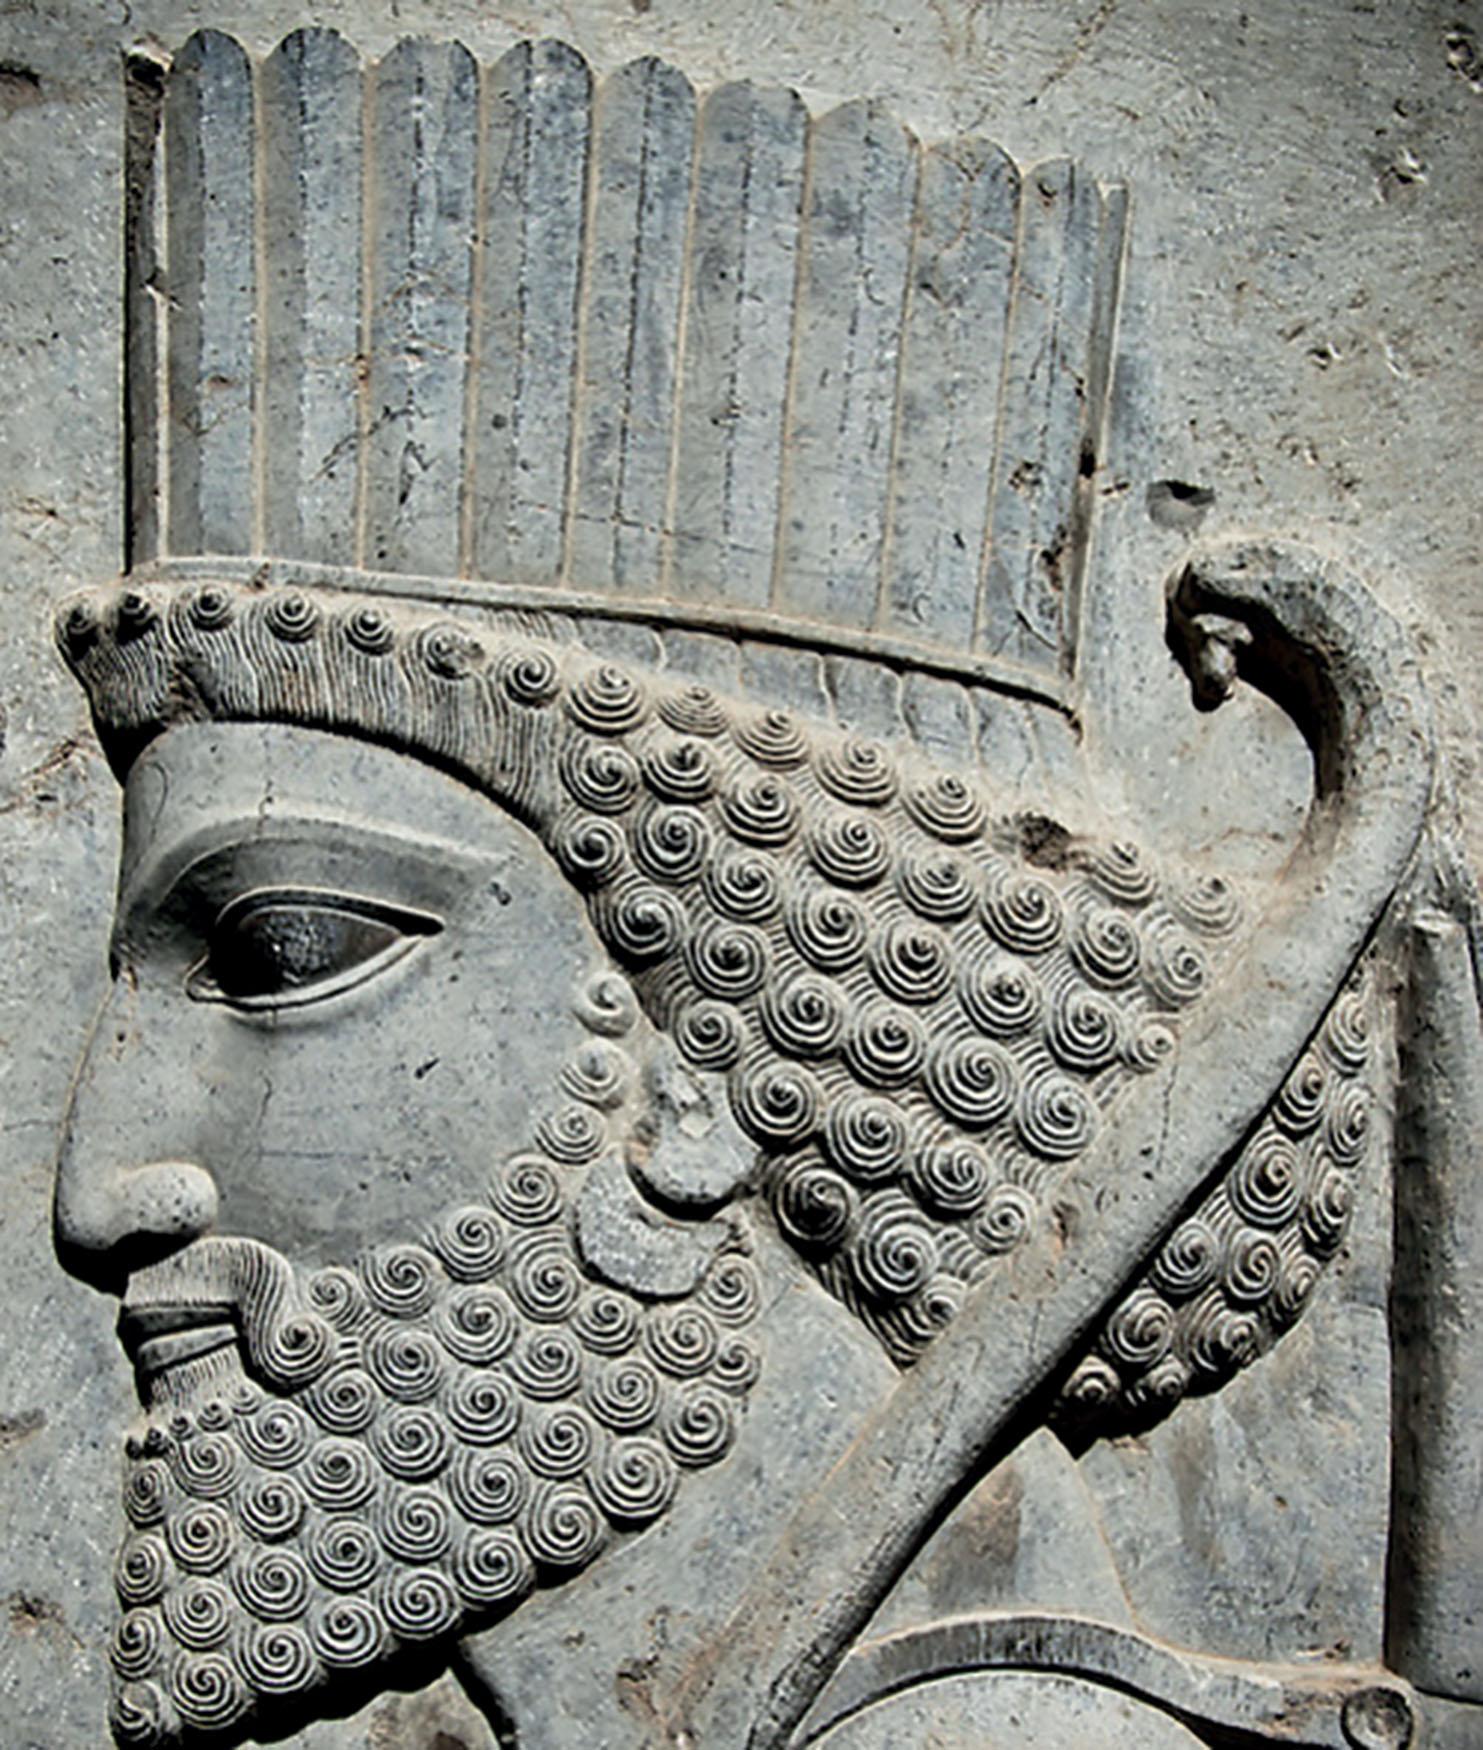 Fig. 60.1, Persepolis stone engraving (circa ~500 BC) shows an ethnic Persian nose with a characteristic hump and droopy tip which persist today.